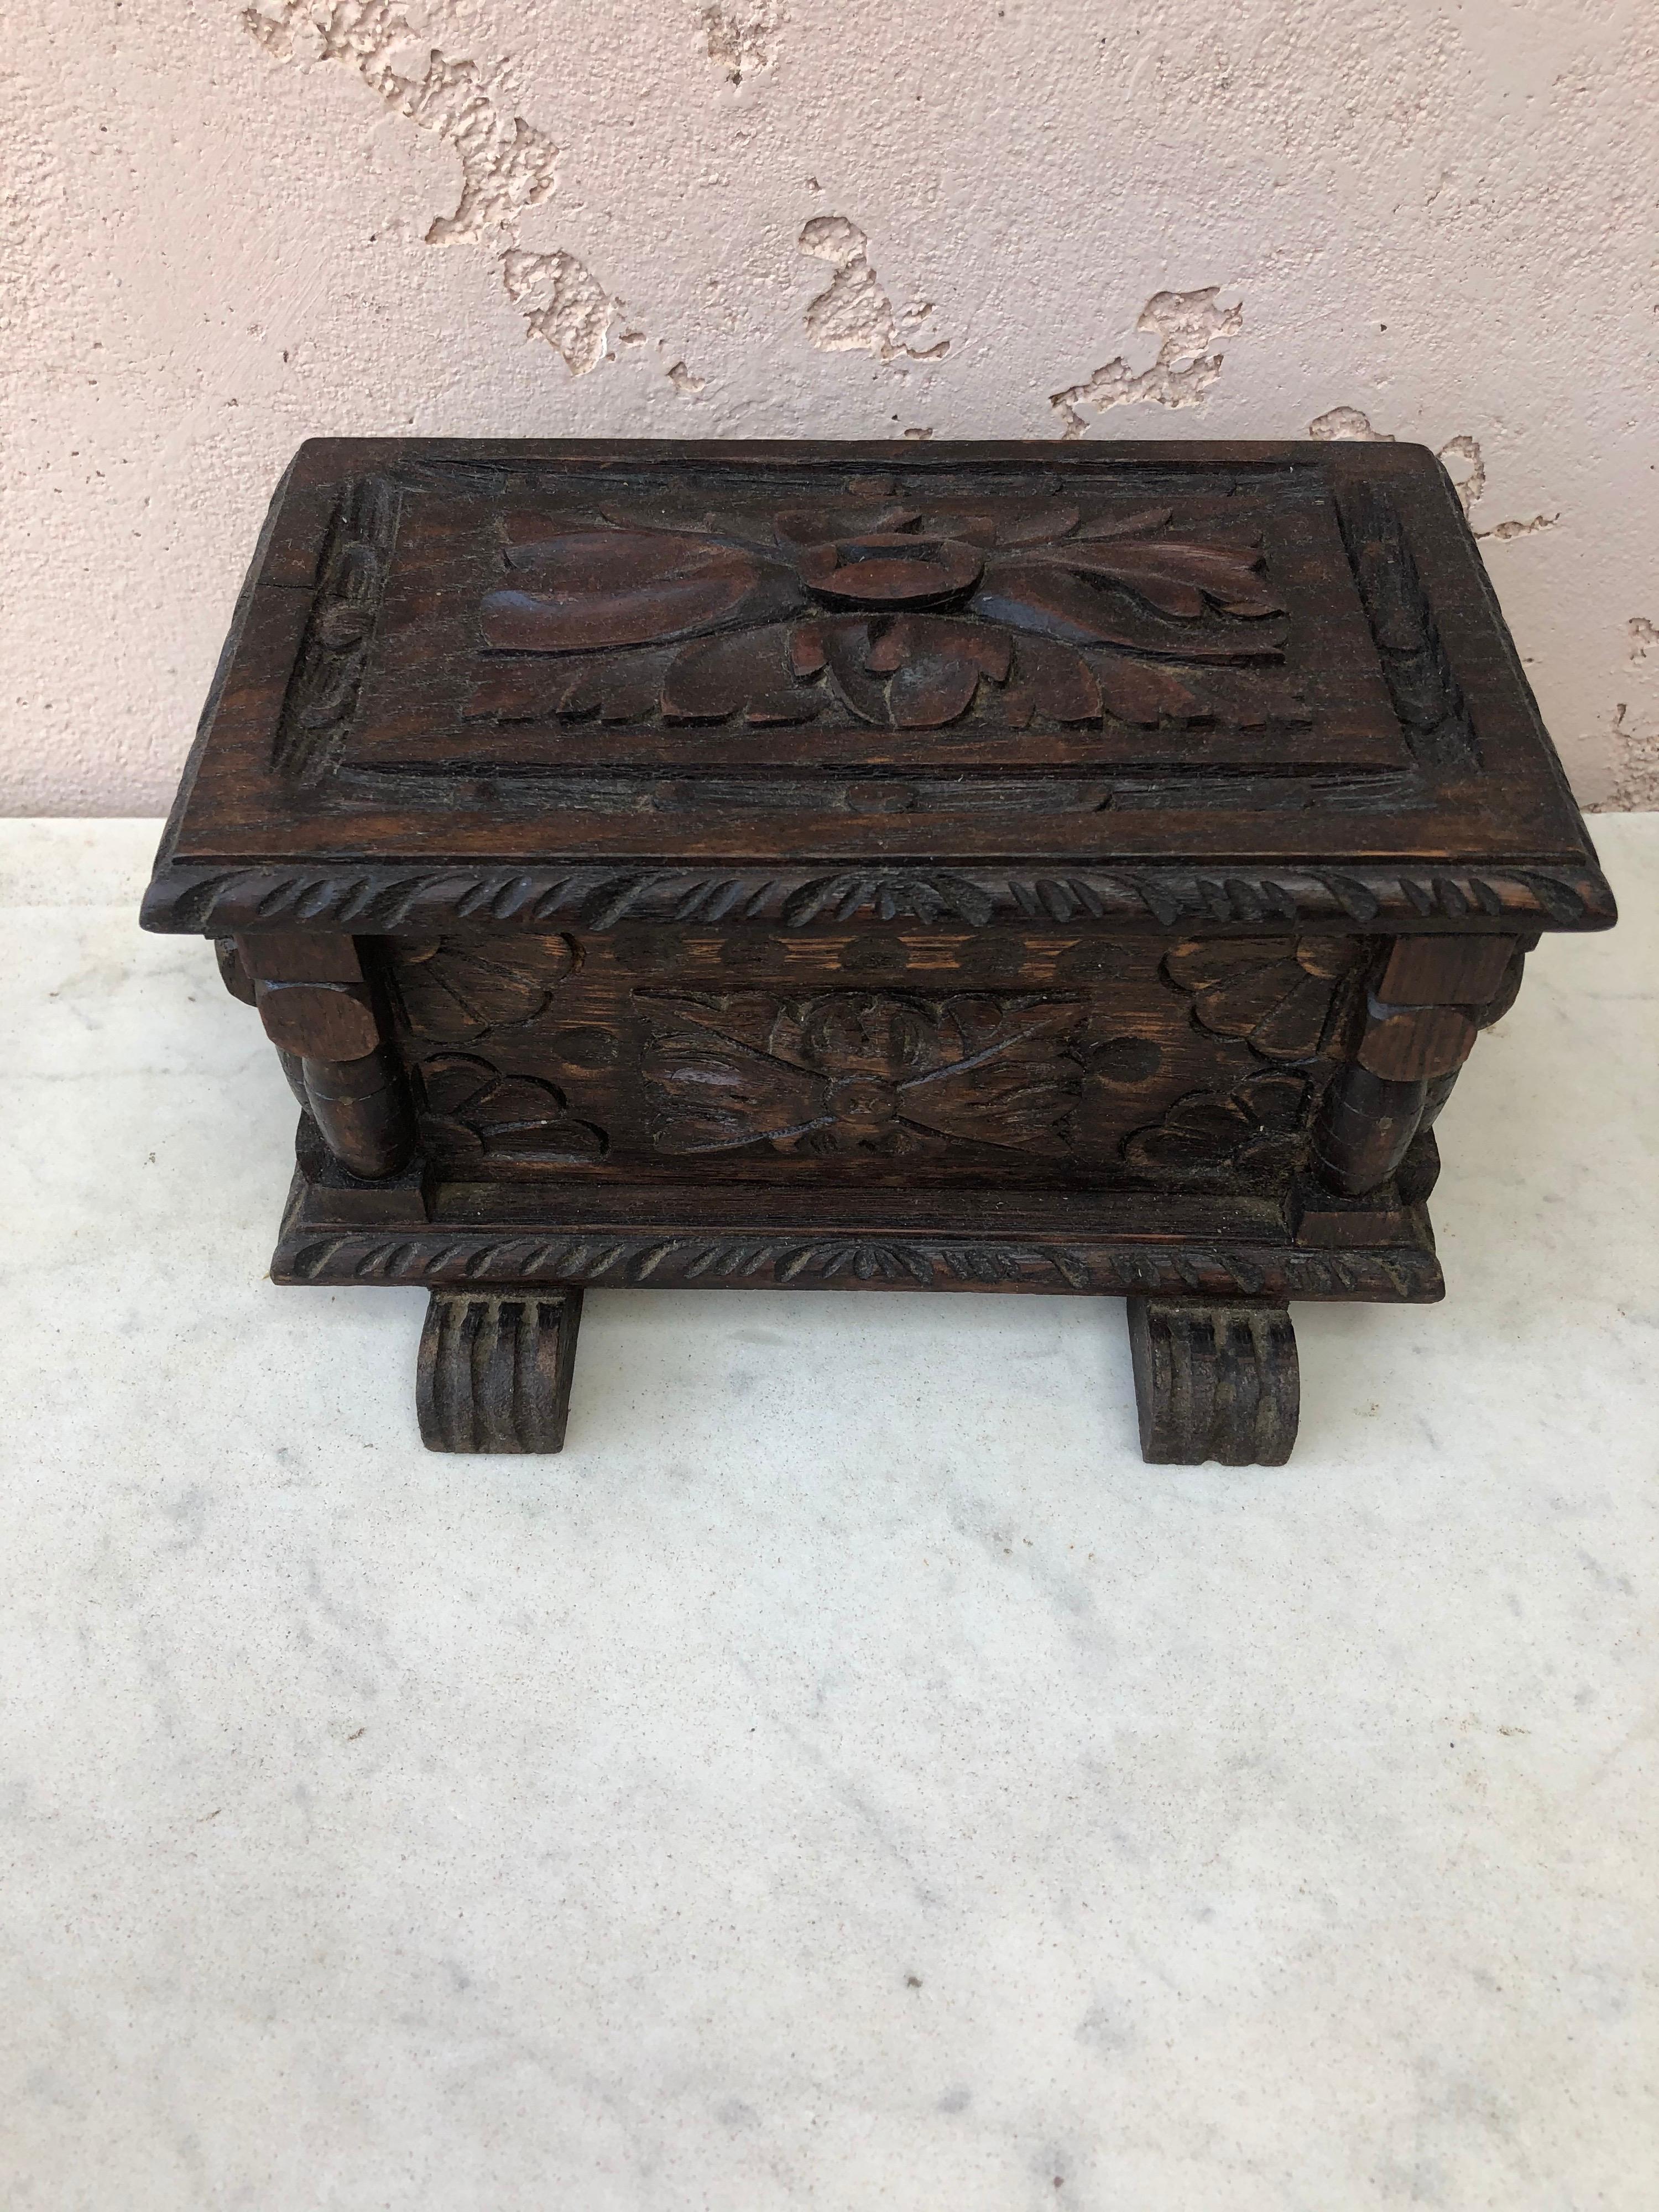 French Black Forest wood box, circa 1900,
Possibly a jewel box.